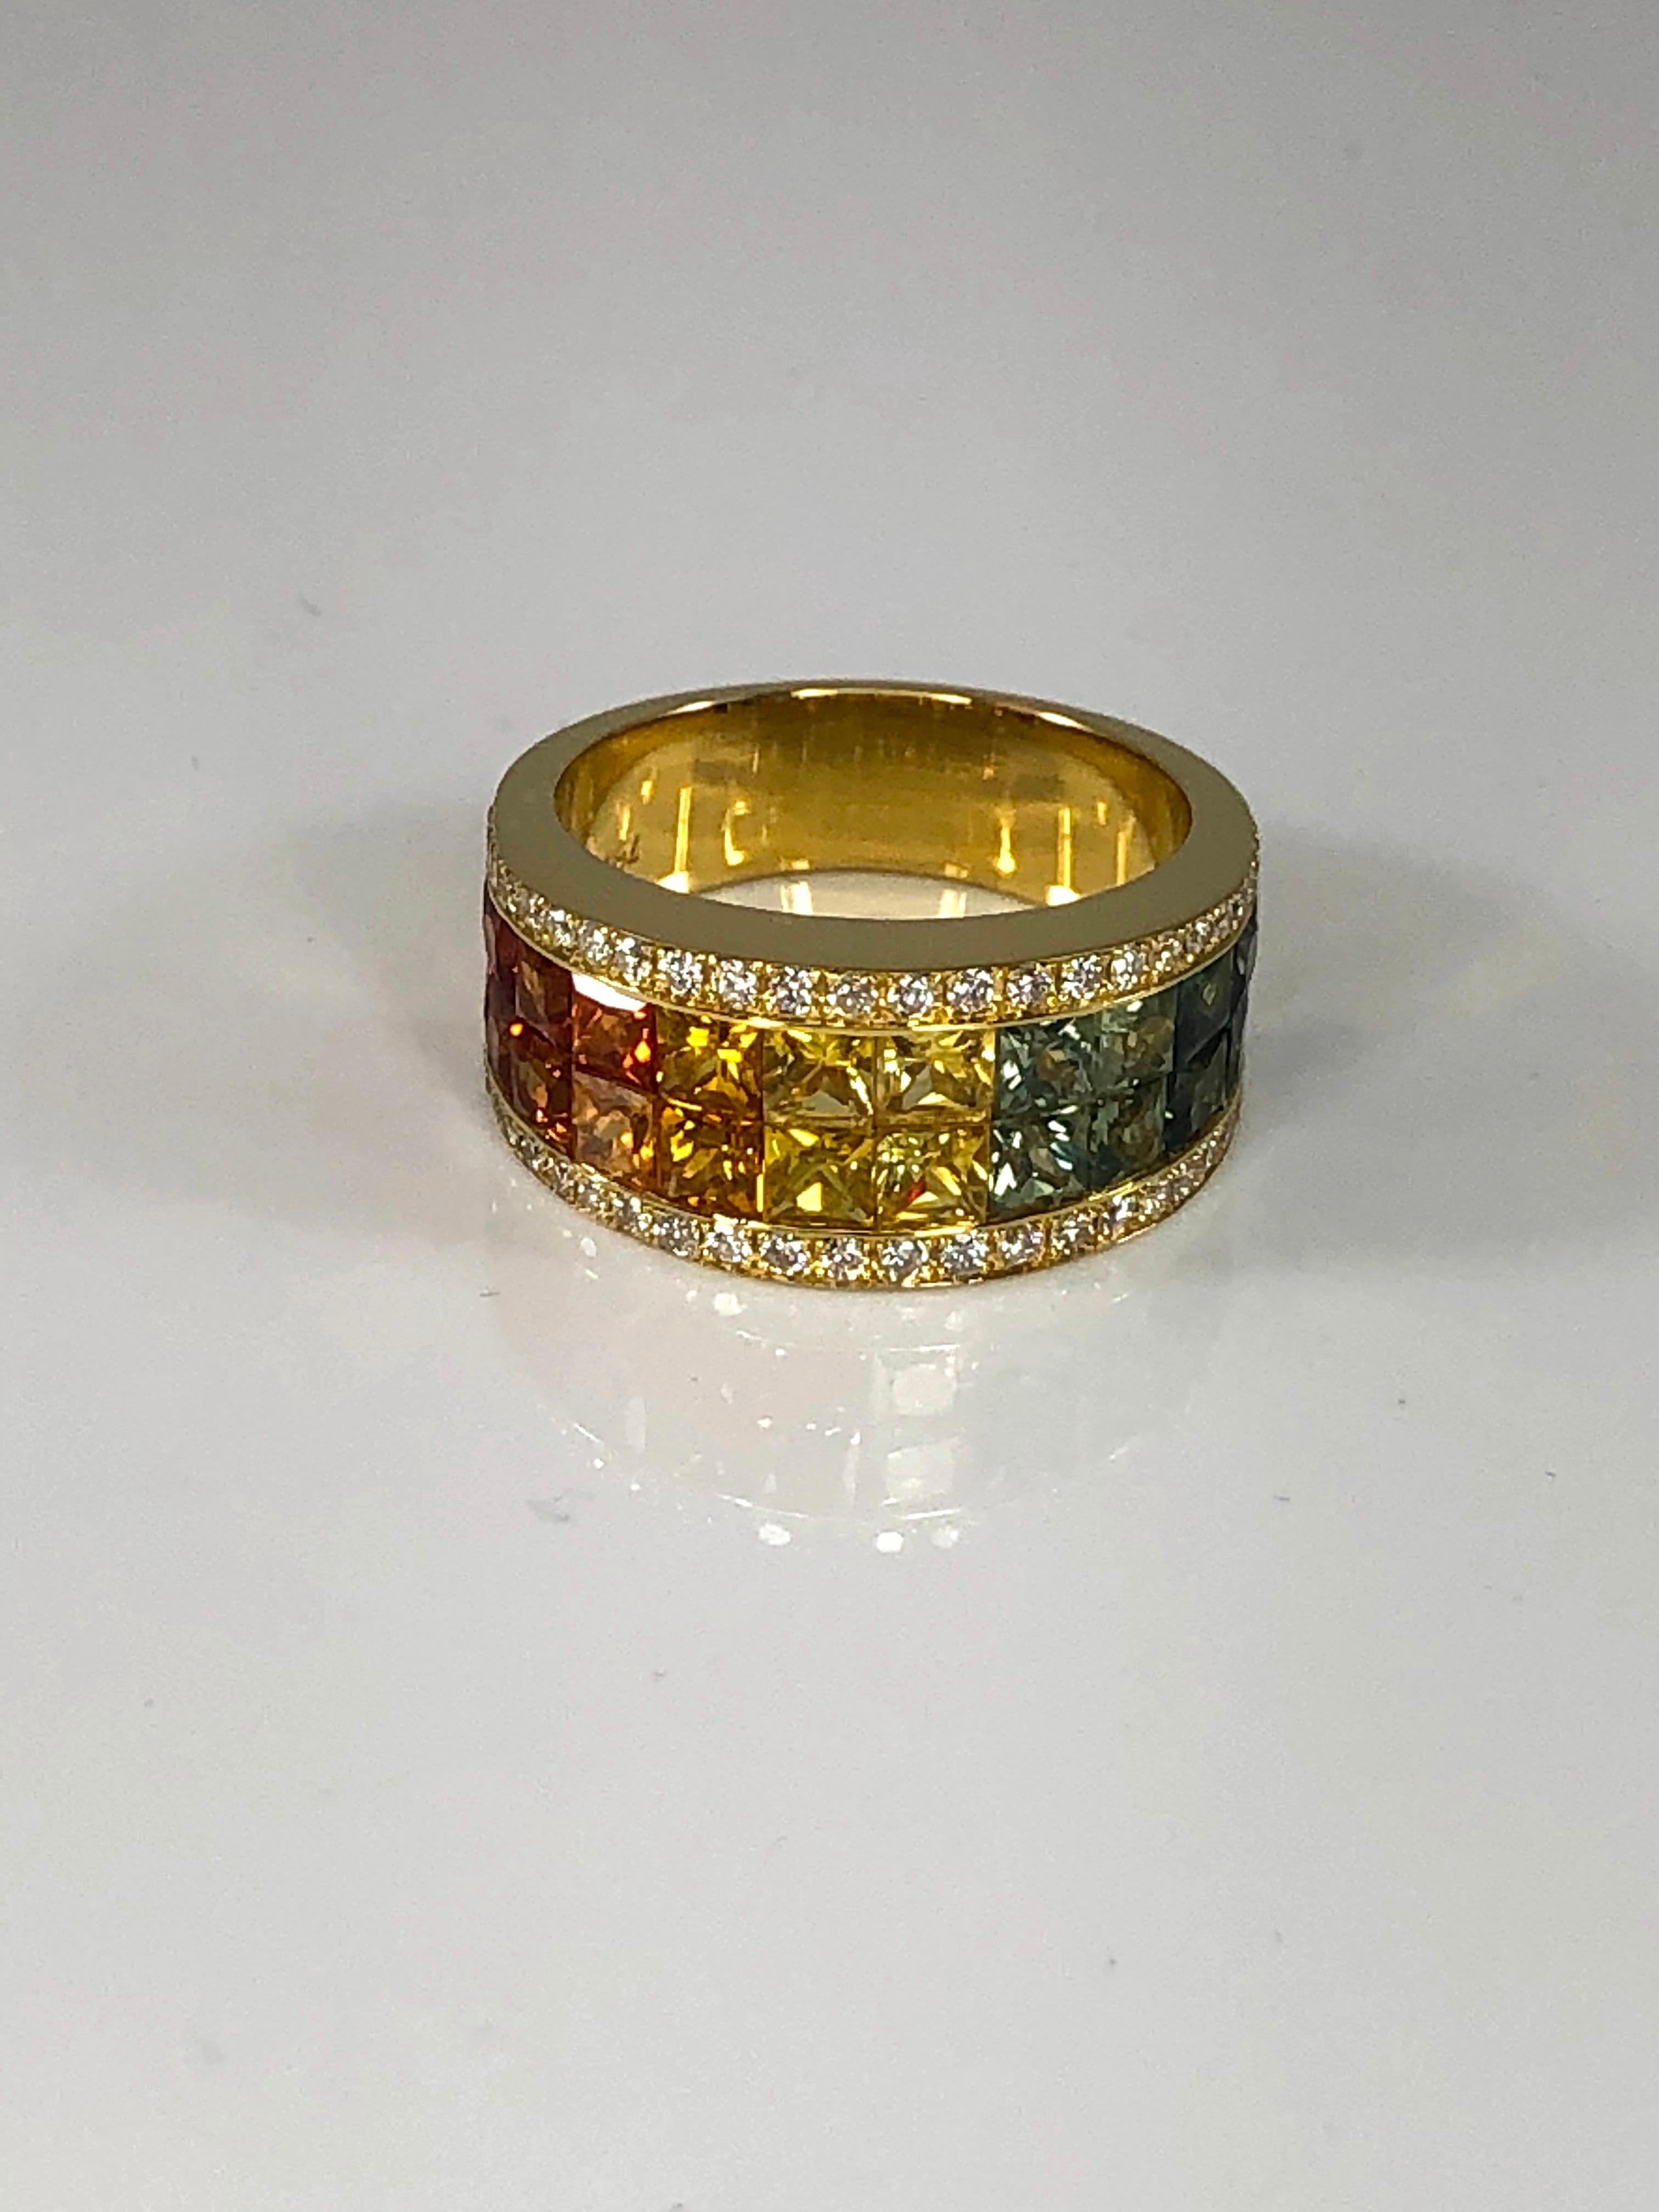 S.Georgios designer 18 Karat Yellow Gold Band Ring with two rows of invisible set Rainbow color Princess Cut natural Sapphires a total weight of 3.17 Carat and 0.40 Carat Brilliant Cut White Diamonds. 
This gorgeous ring is all custom made in our